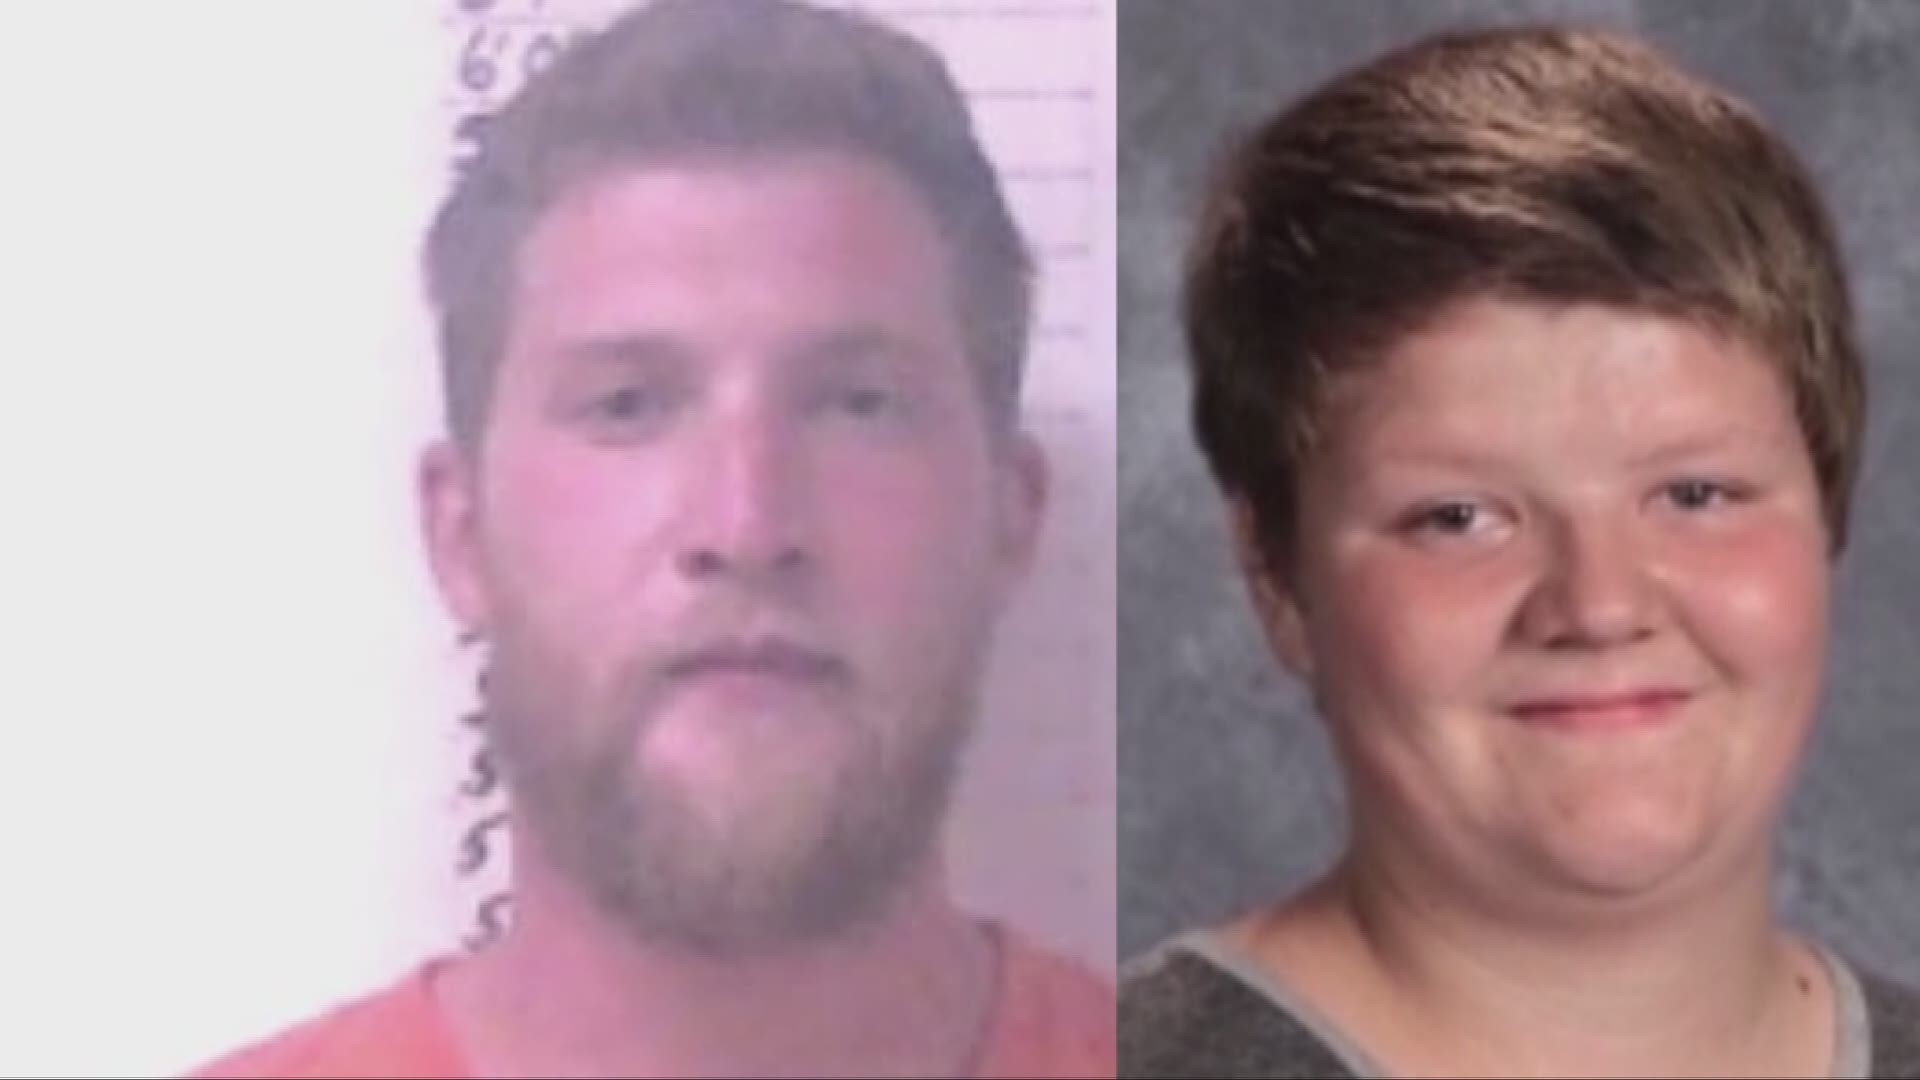 Sheriff's deputies in Carroll County have arrested a man in connection with the death of a teen boy who was found this past April in a shallow grave, WKYC confirmed Wednesday.